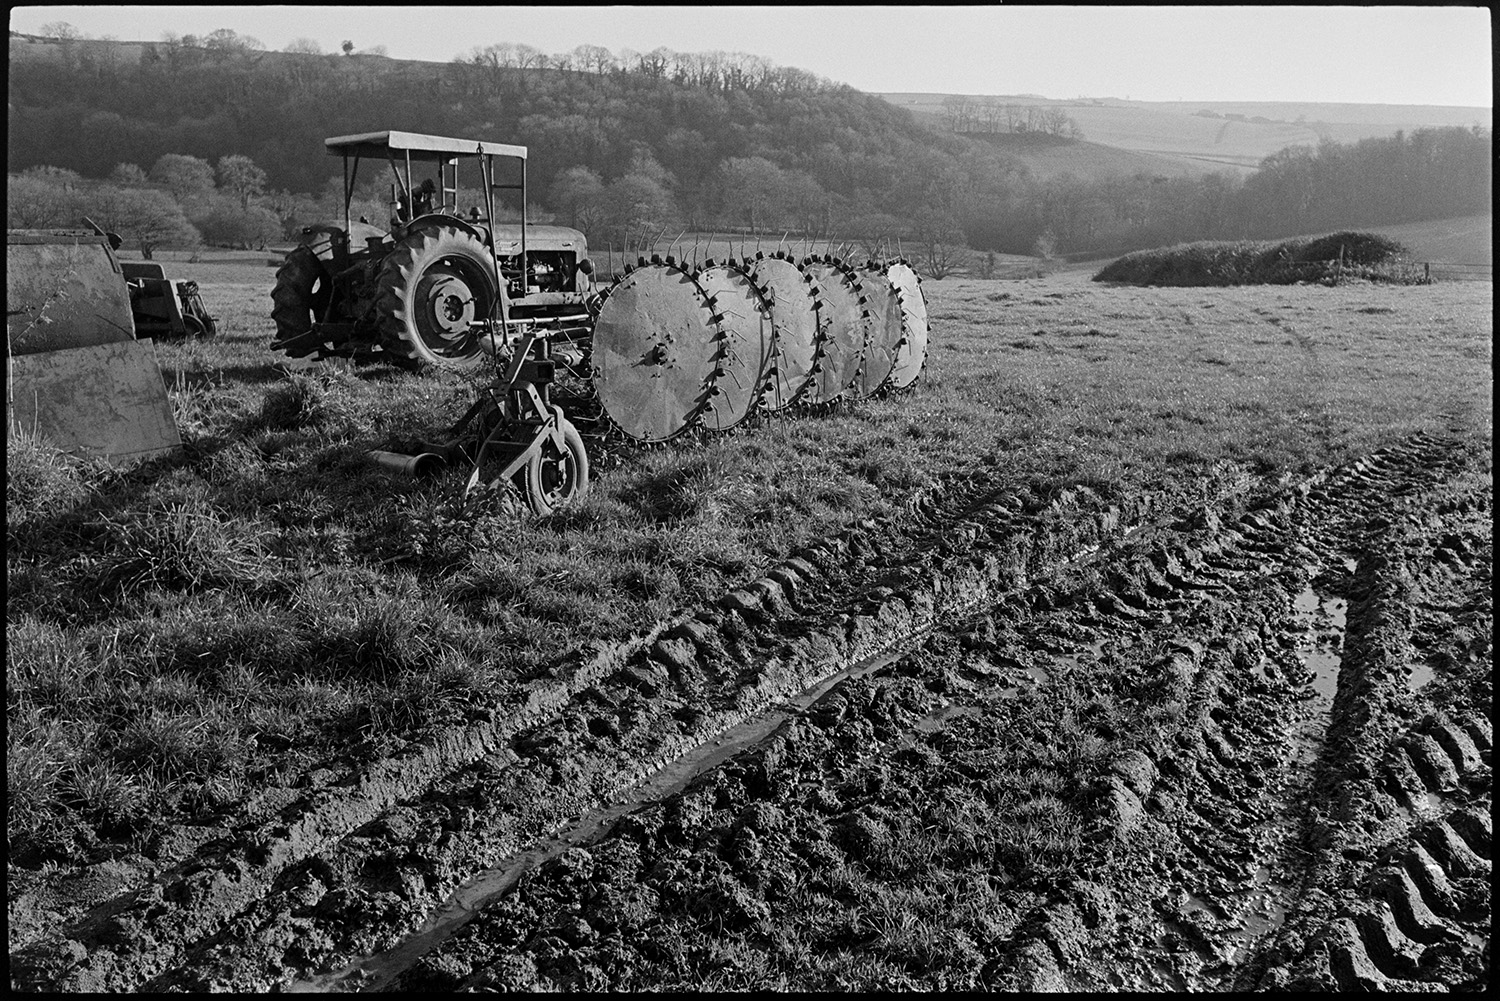 Tractor, muck spreader and whisk parked in muddy field.
[A tractor and hay whisk in a muddy field near Brushford. A wooded valley is visible in the background.]